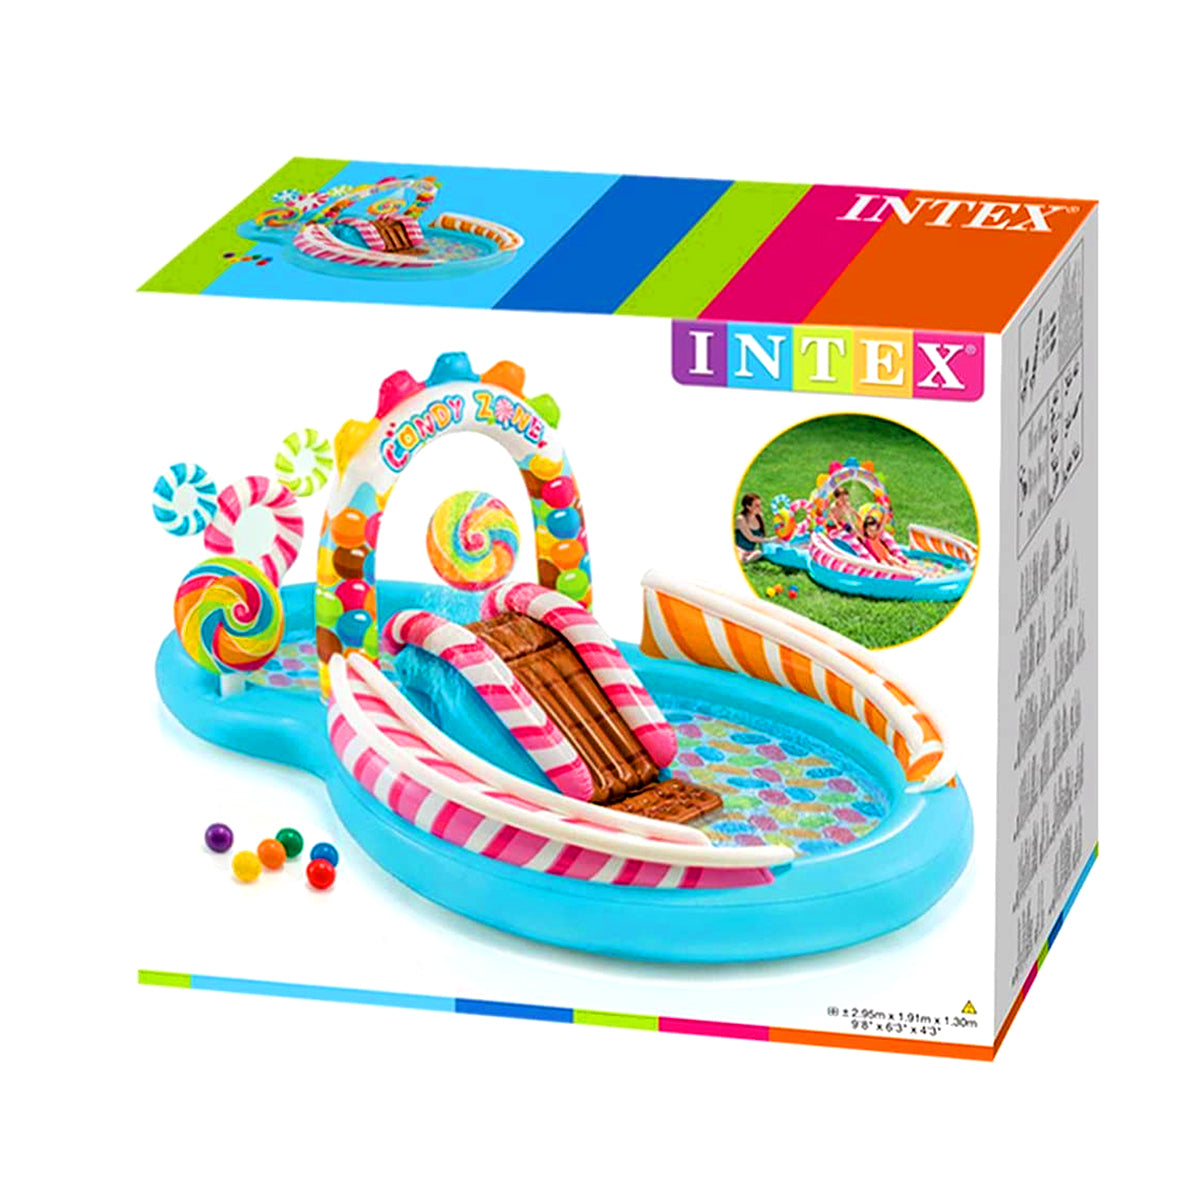 Intex - Candy Zone Play Centre Pool